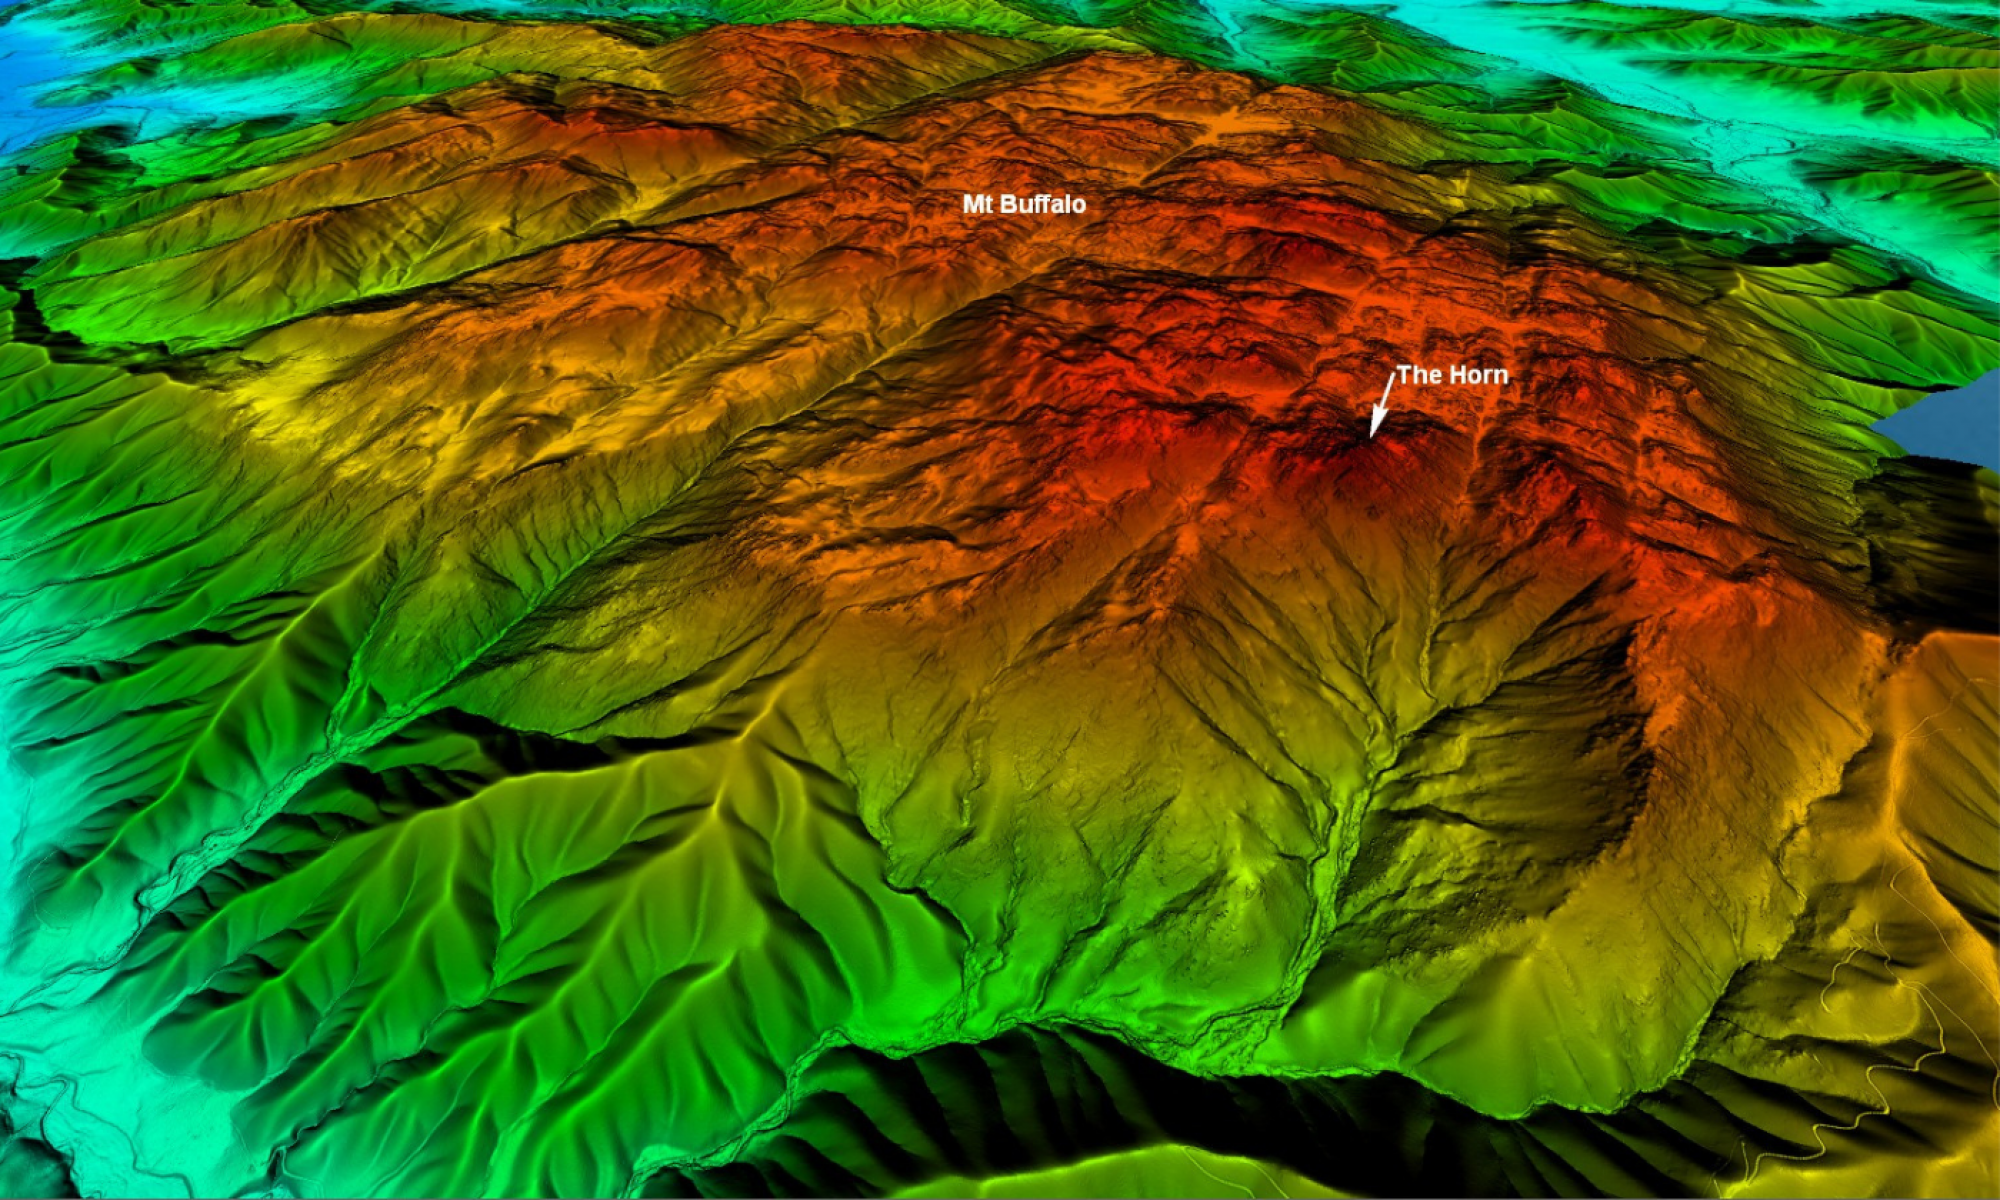 A derived image of Mount Buffalo and The Horn with the terrain and heights demonstrated using colour. The highest points are shaded in red, with the lowest valleys shown in aqua, and shades of yellow and green in between.